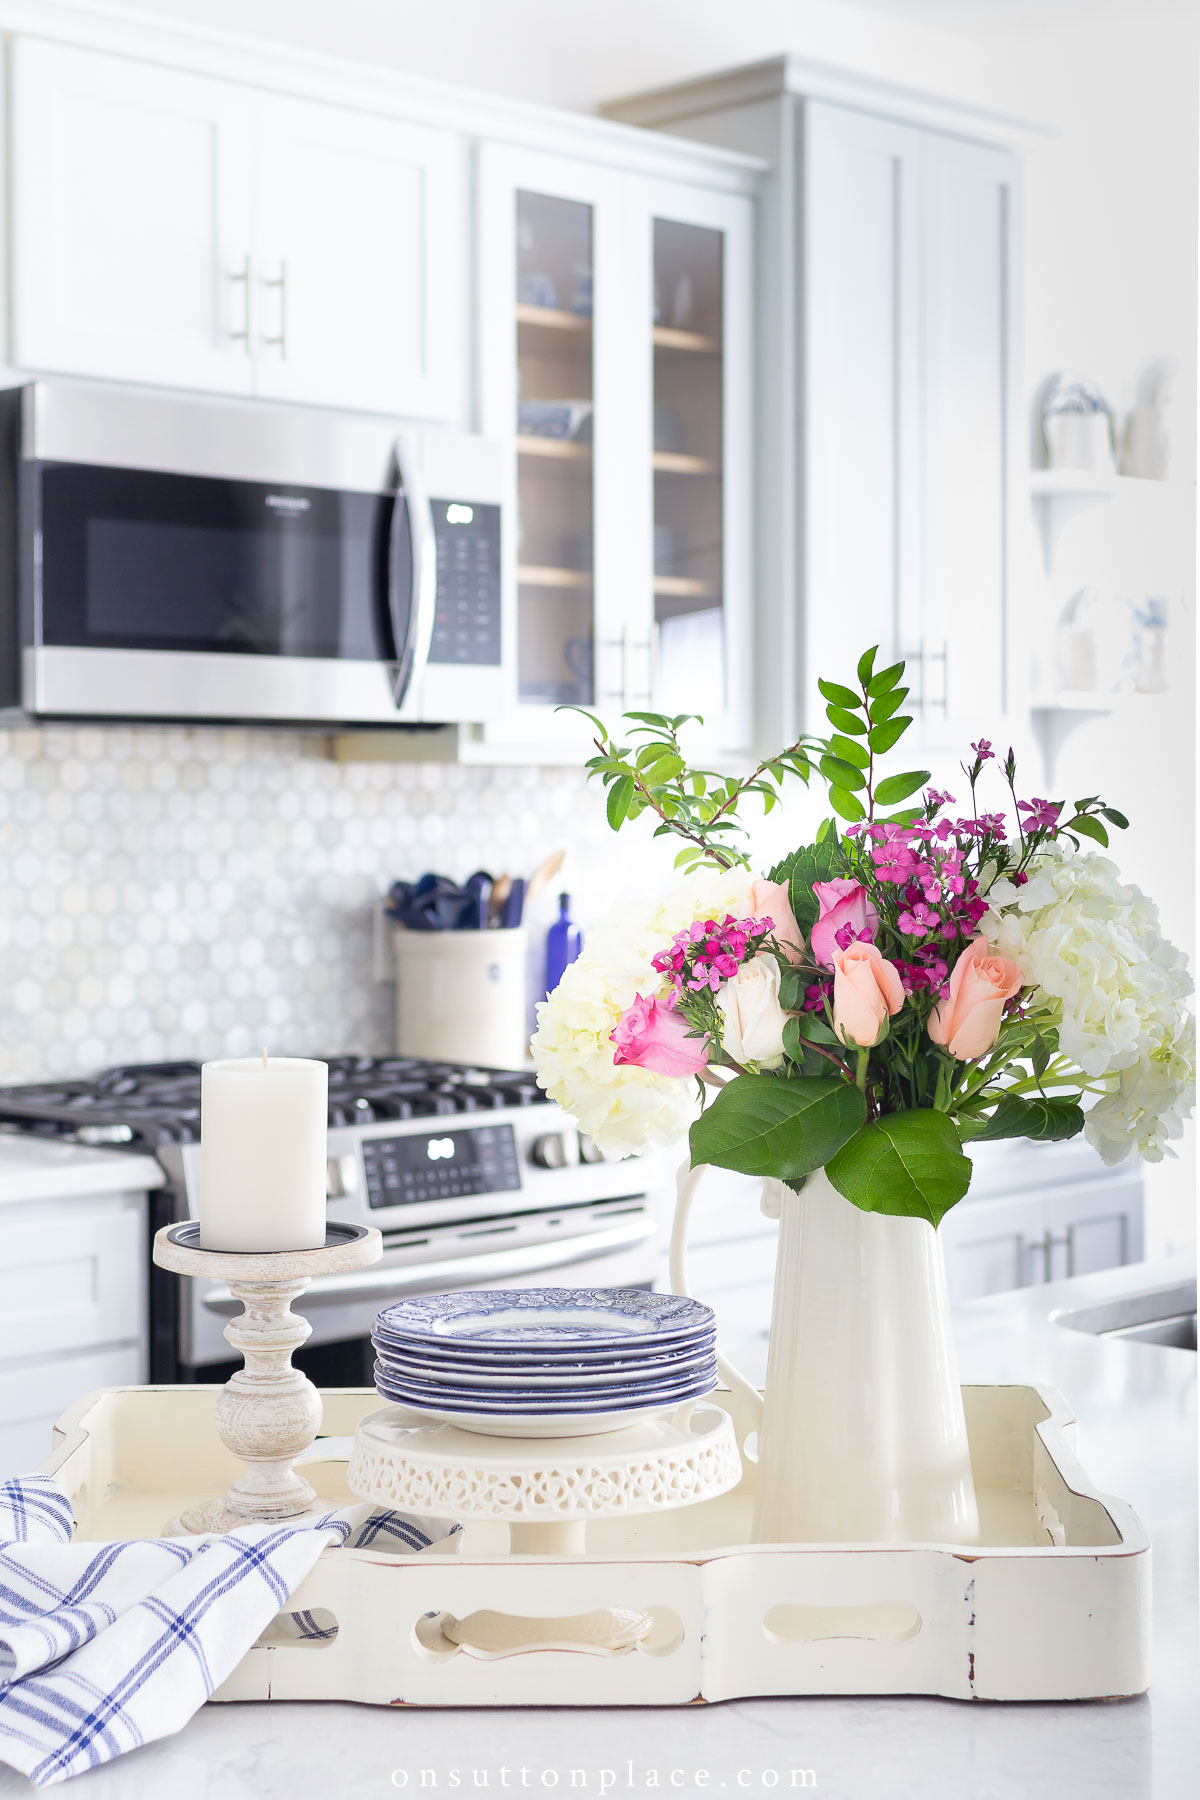 https://www.onsuttonplace.com/wp-content/uploads/2022/02/tray-with-flowers-plates-and-candle-on-kitchen-island.jpg